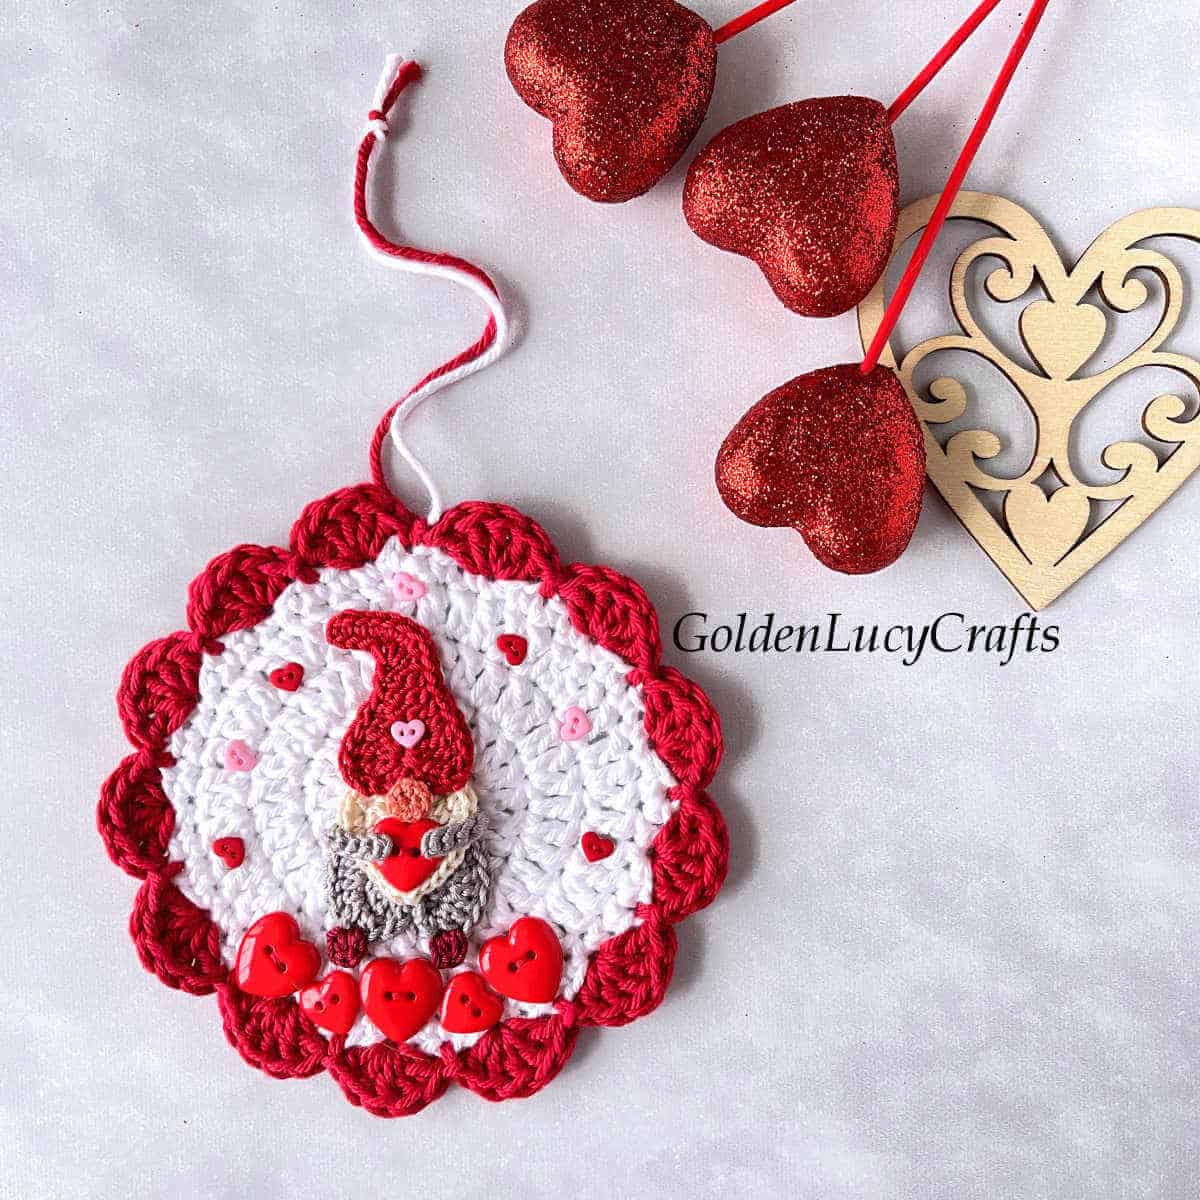 Crochet ornament with heart gnome on it.